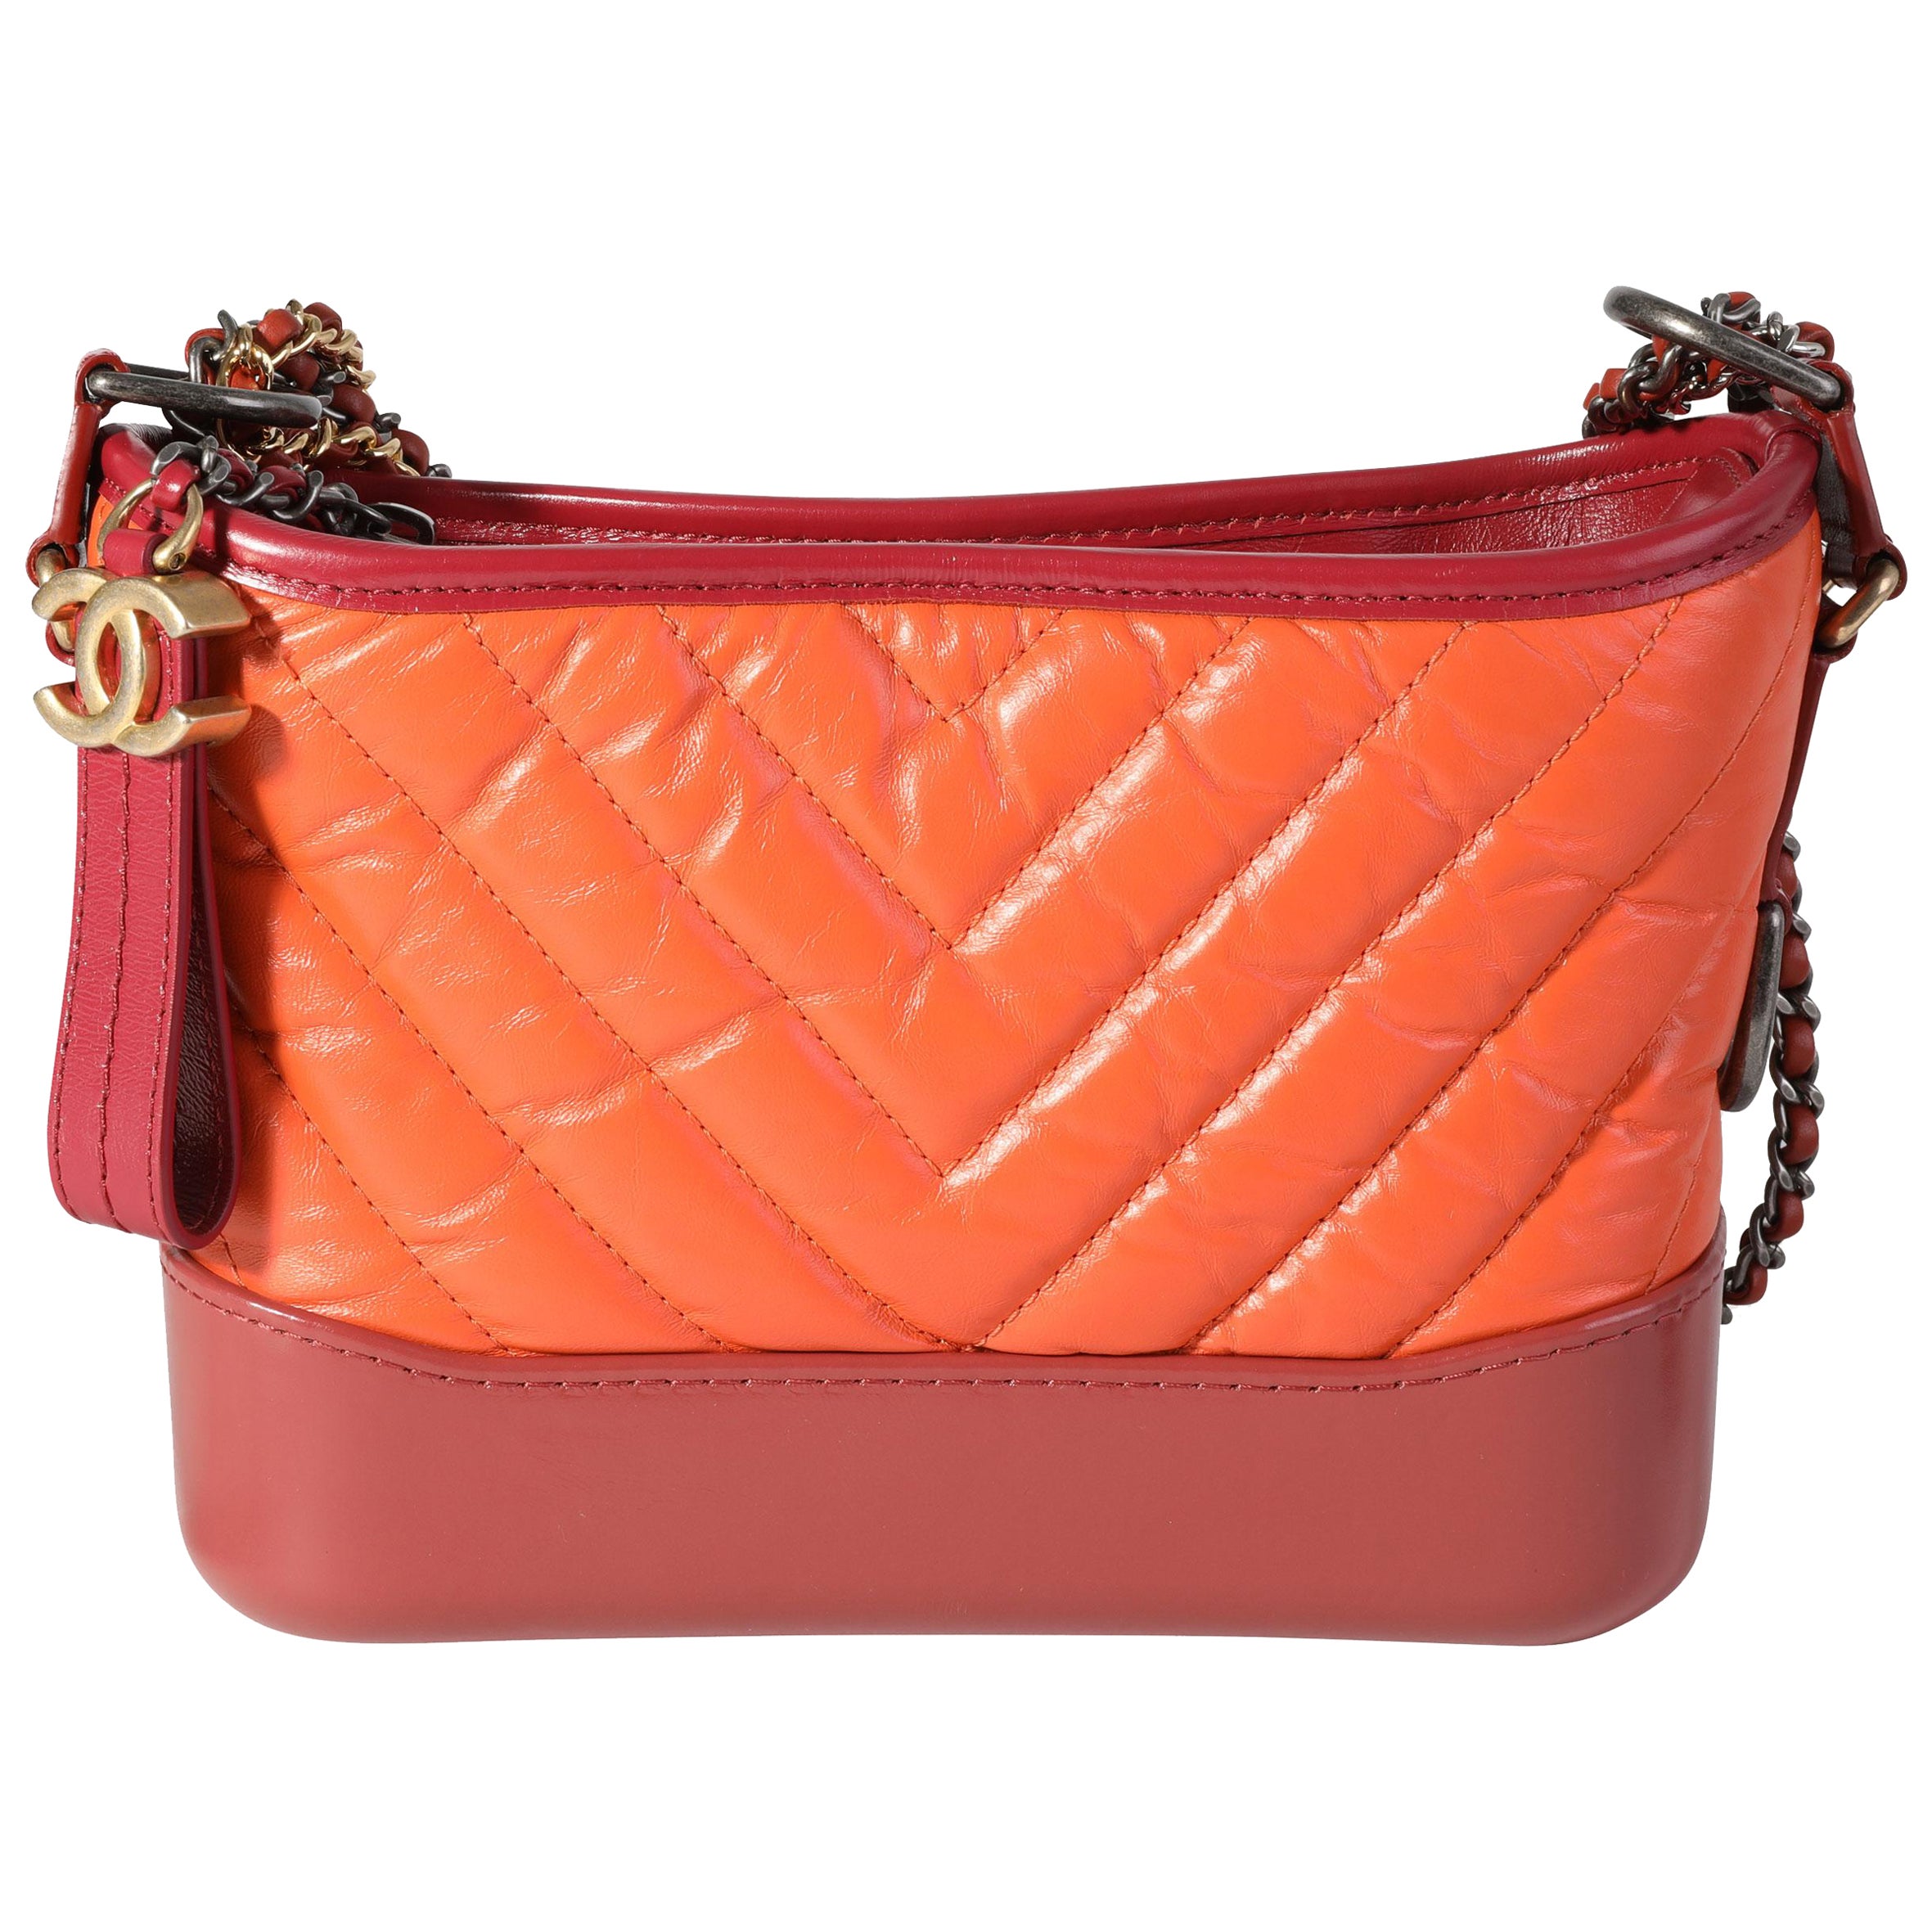 Chanel Orange and Red Aged Calfskin Chevron Quilted Small